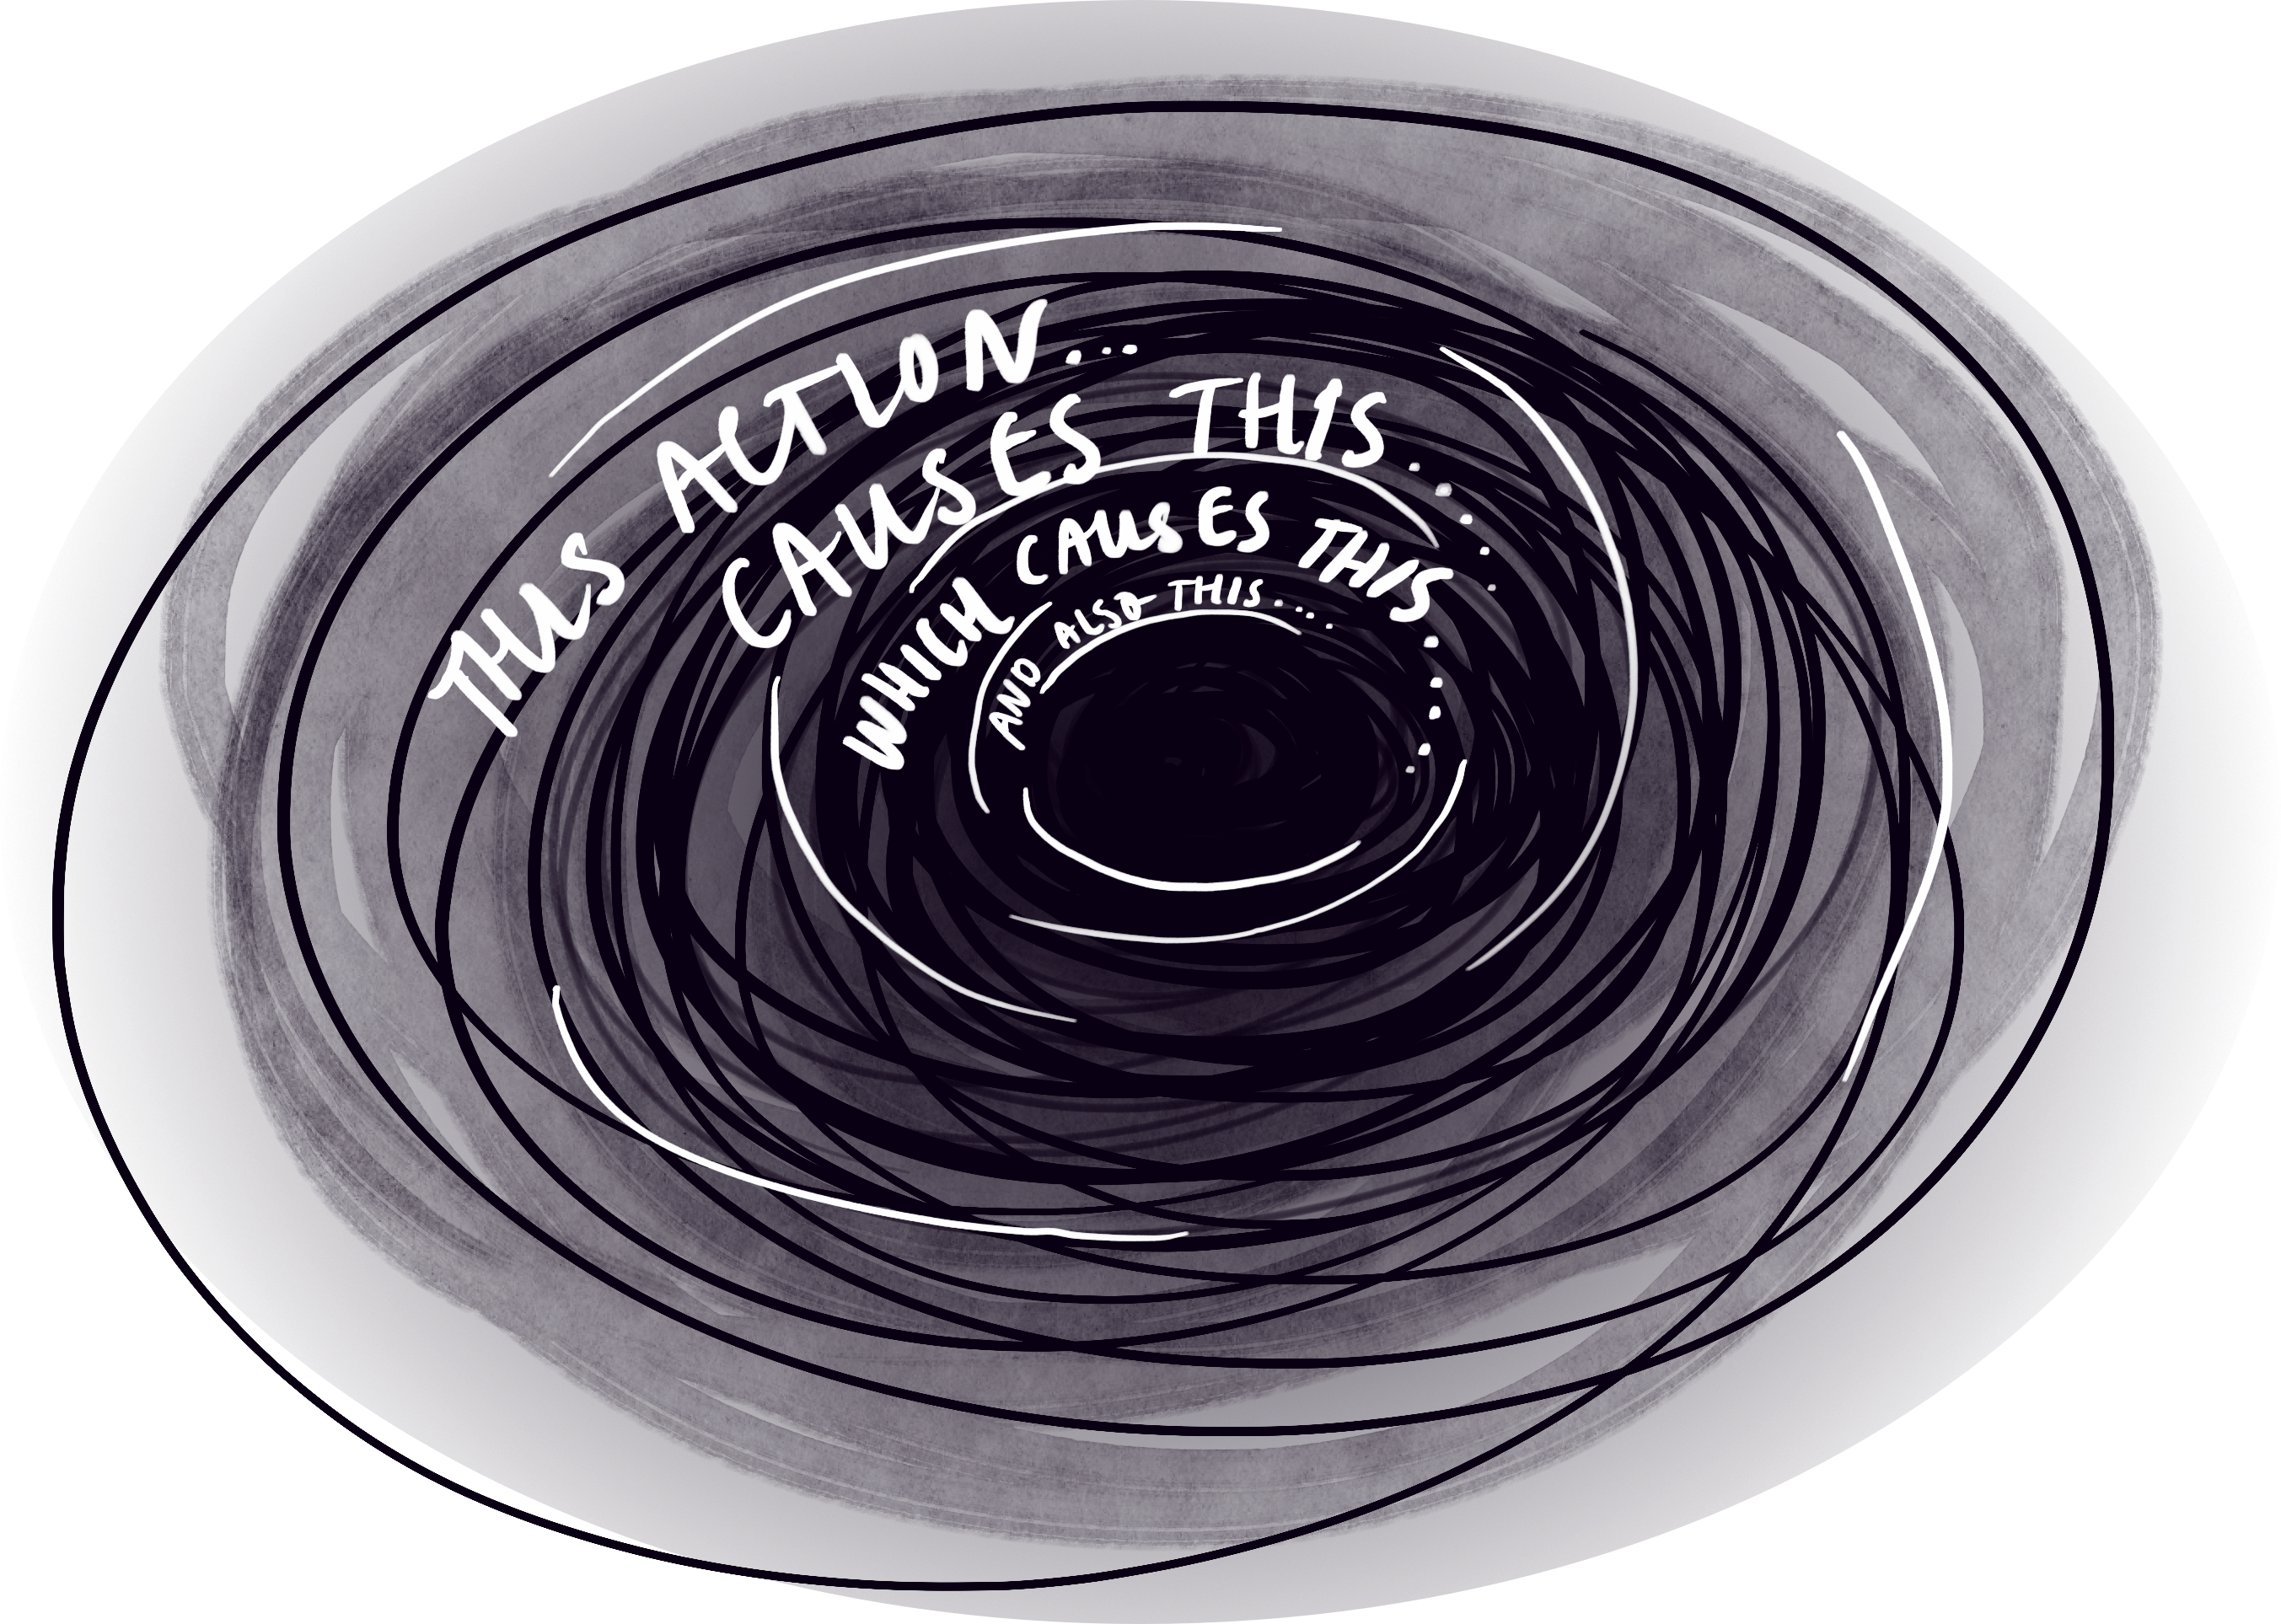 A stylised picture of a hole. You can't see the bottom, it just falls away into darkness. Down the sides of the hole the words 'This action... causes this... which causes this... and also this...'